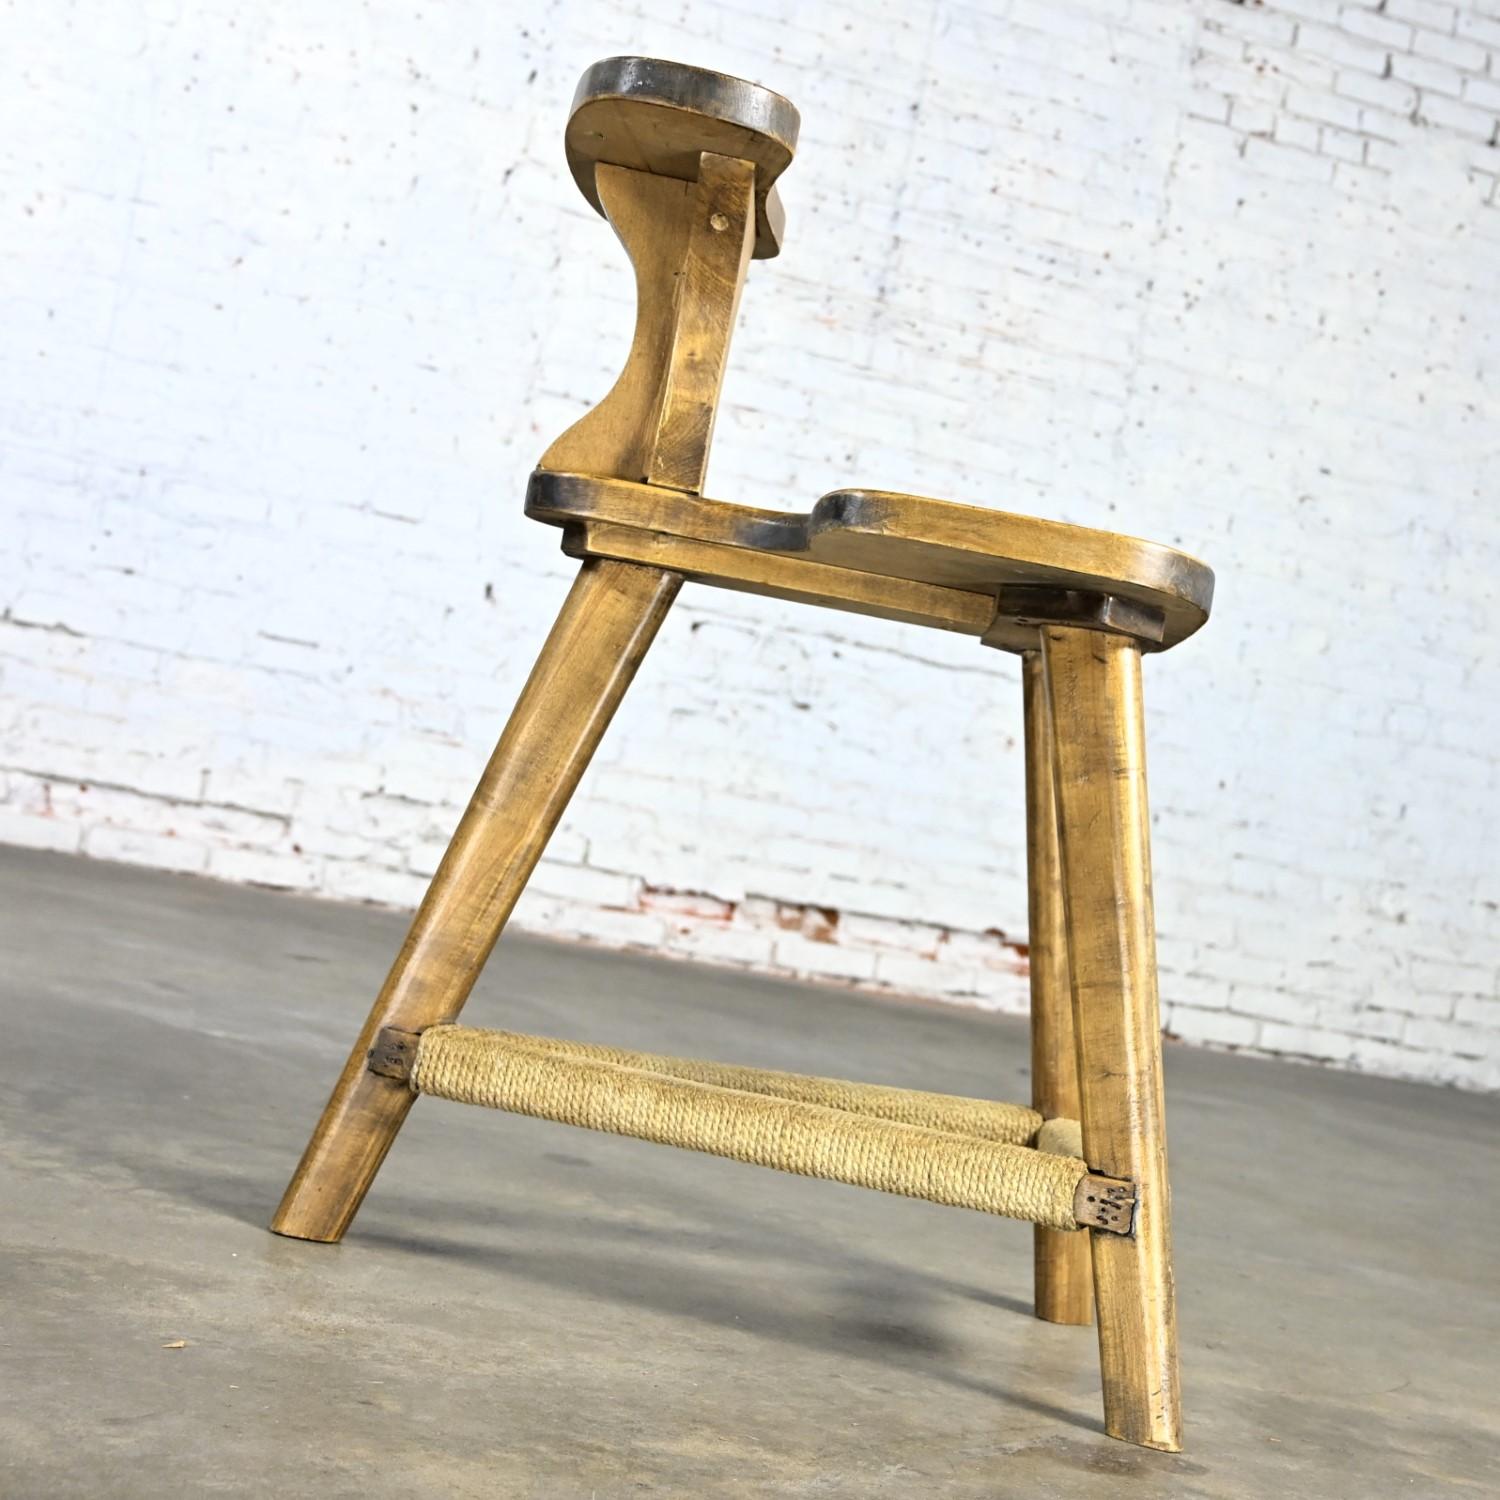 Rustic Distressed Maple Cockfighting Betting or Sporting Chair Tri-Leg Base In Good Condition For Sale In Topeka, KS